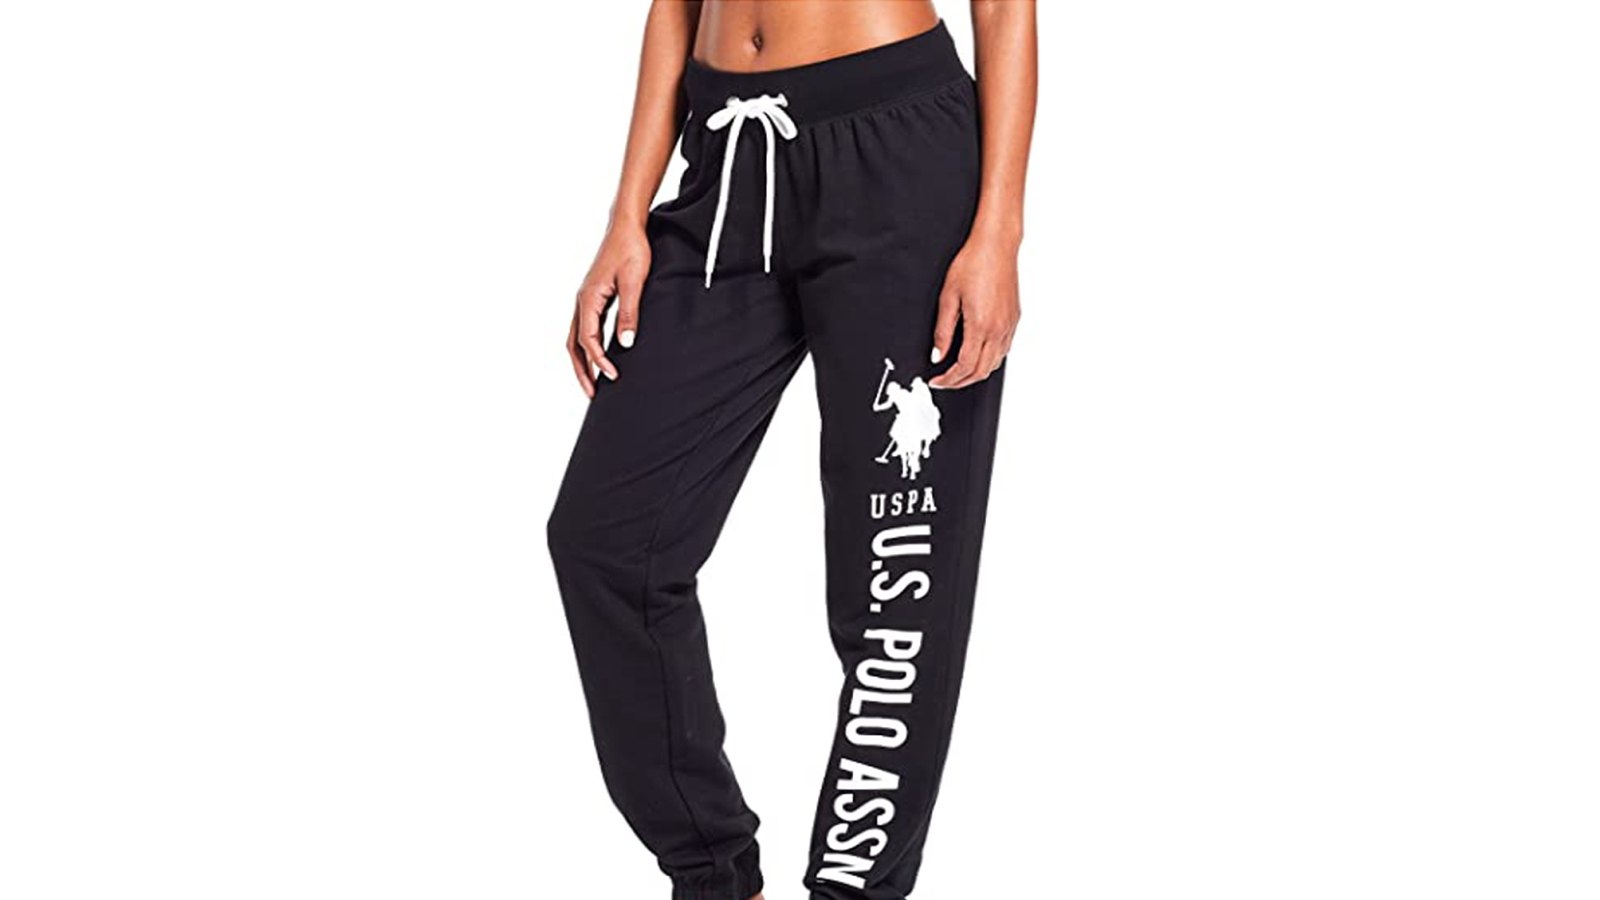  US Polo Assn Womens Sweatpants, French Terry Black